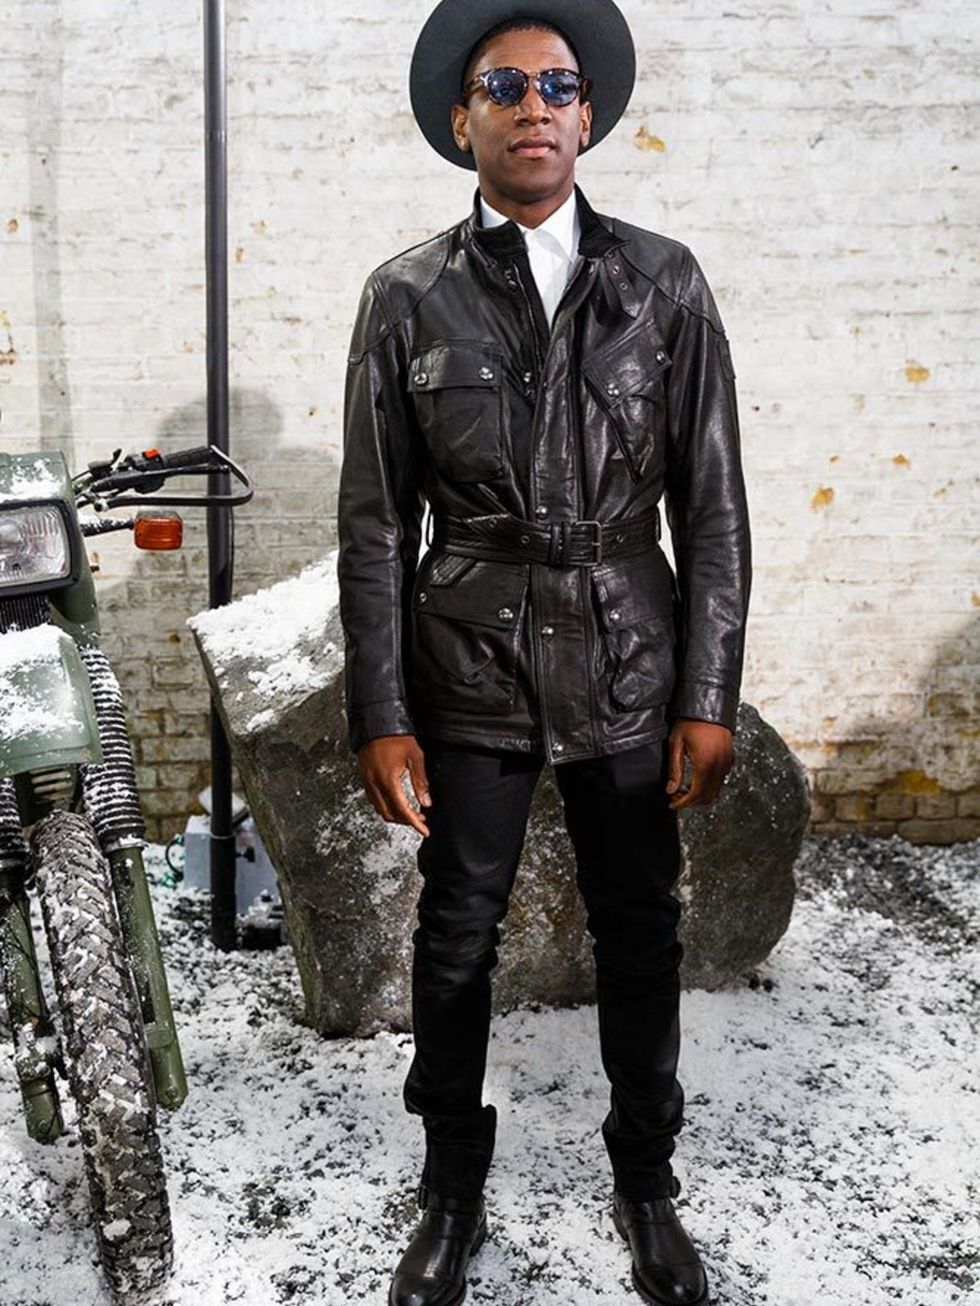 Labrinth attends the Belstaff presentation during London Collections A/W 16, January 2016.